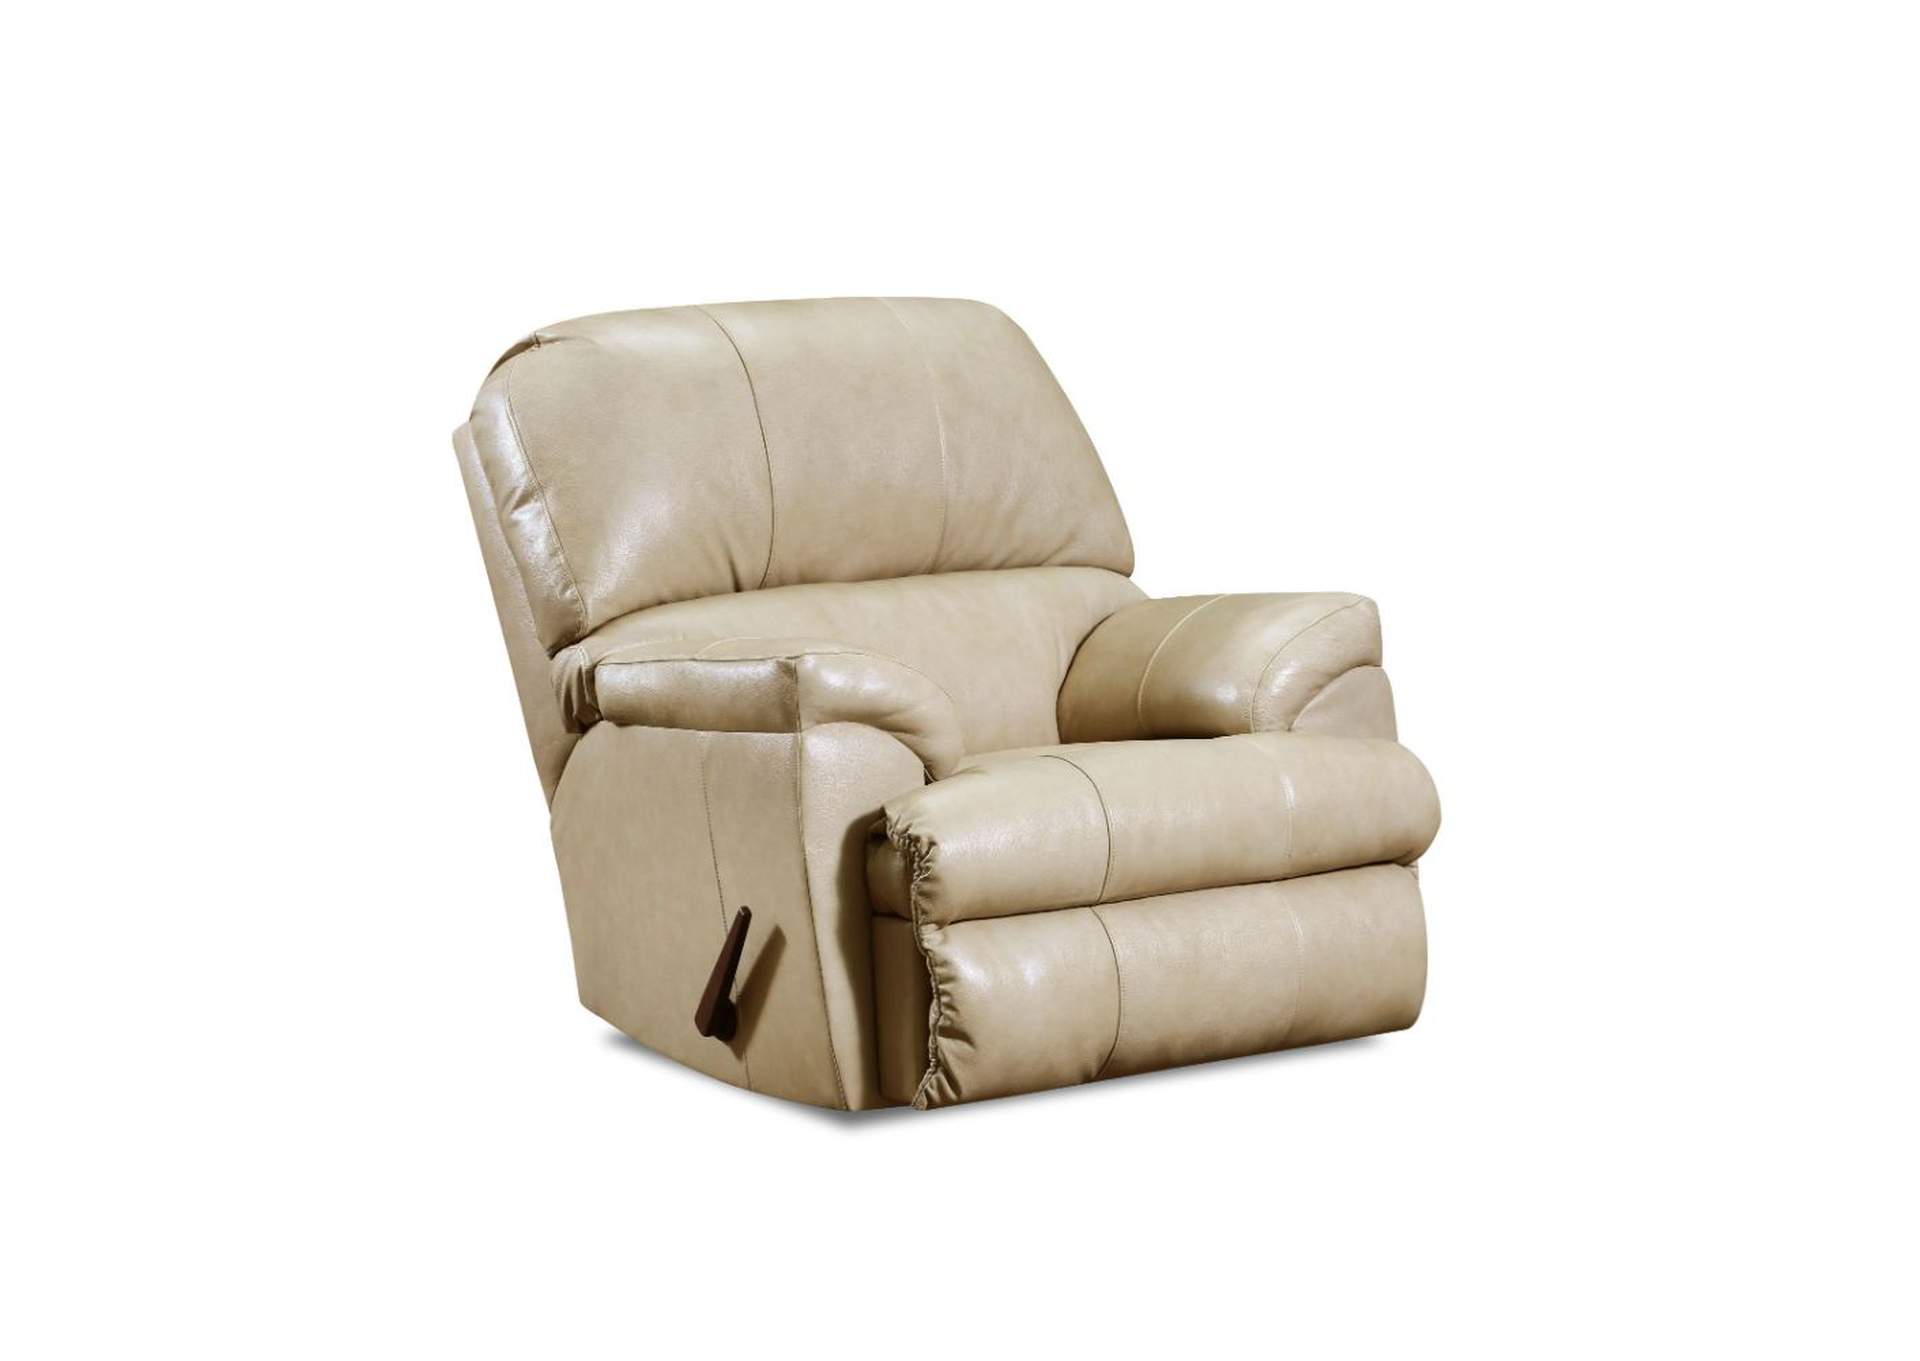 Phygia Recliner,Acme